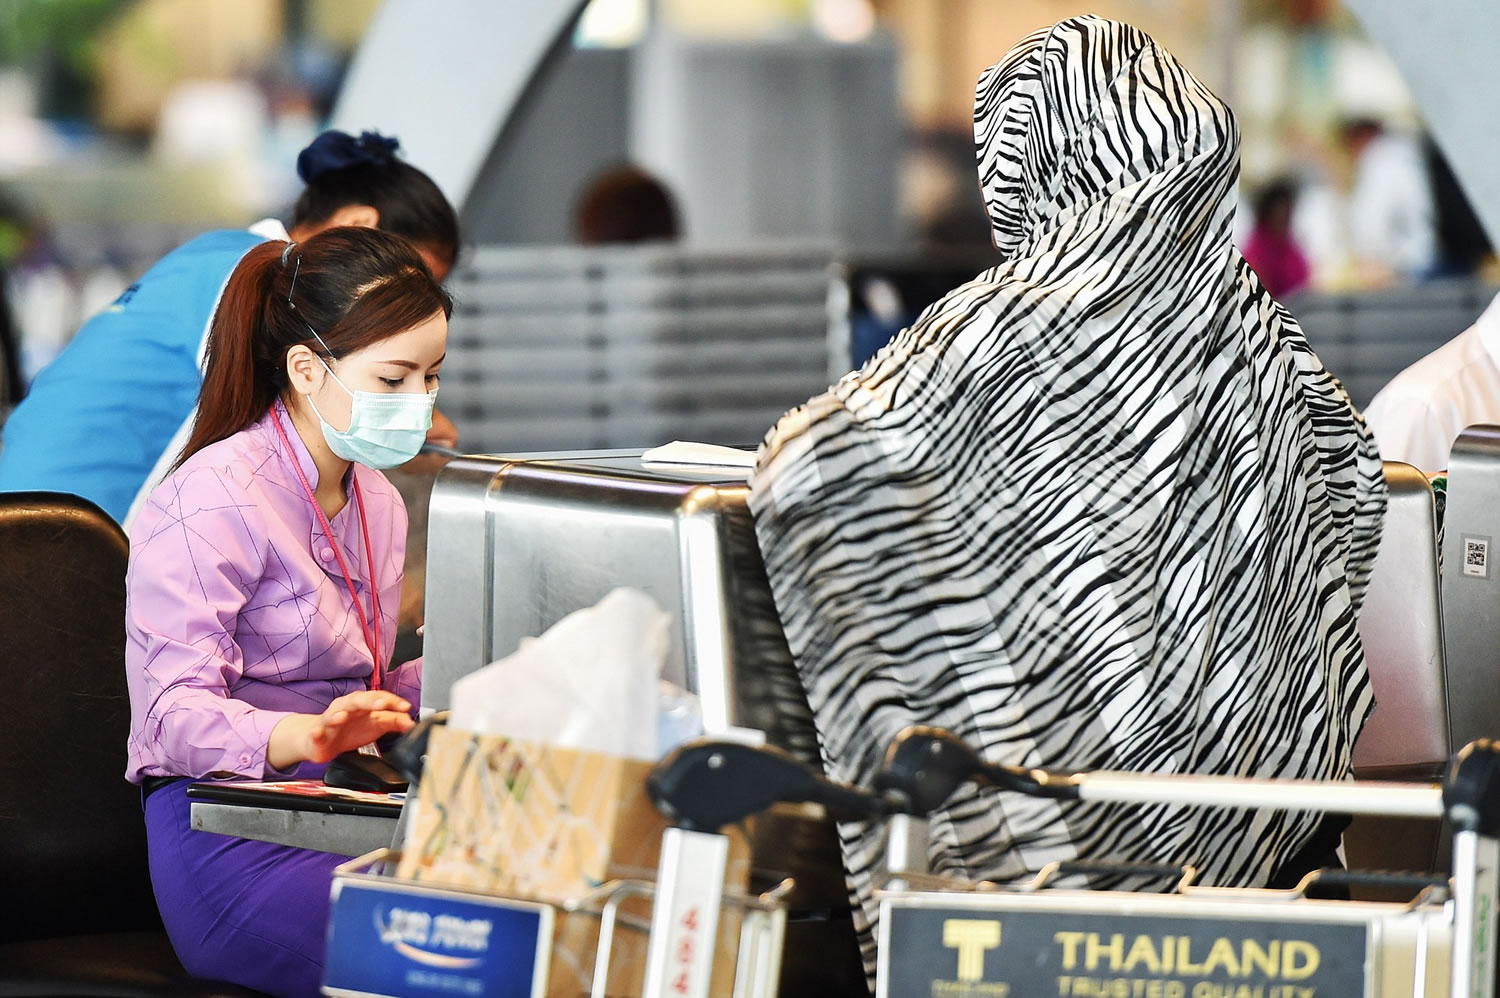 Li Mangmang/Sipa USA
A staffer is seen wearing a facial mask while working at the check-in counter at Suvarnabhumi Airport in Bangkok, Thailand, on June 20. Thailand's public health ministry recently confirmed the country's first case of the Middle East Respiratory Syndrome.